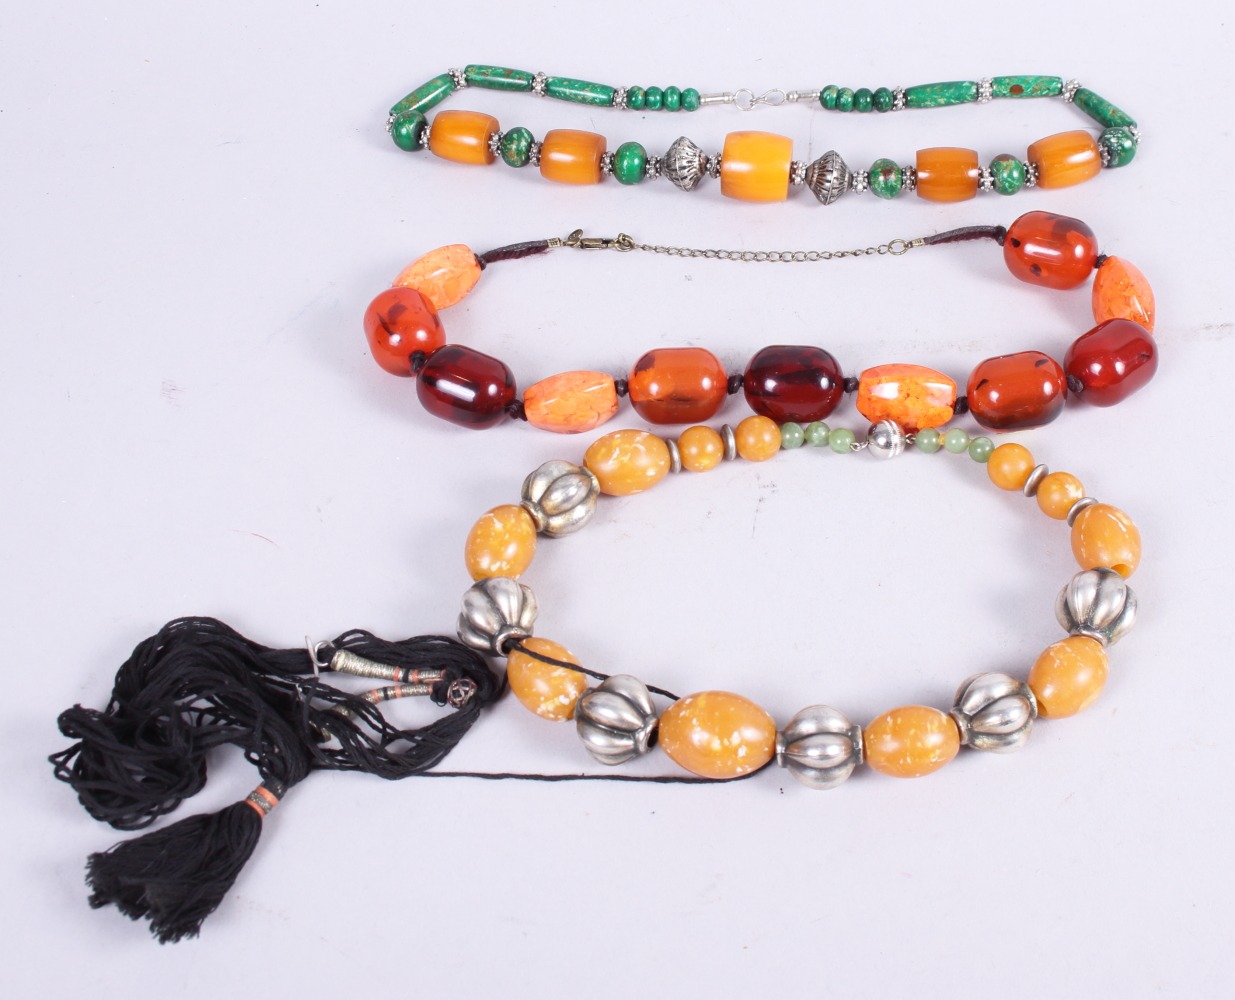 Three "Amber" necklaces, various